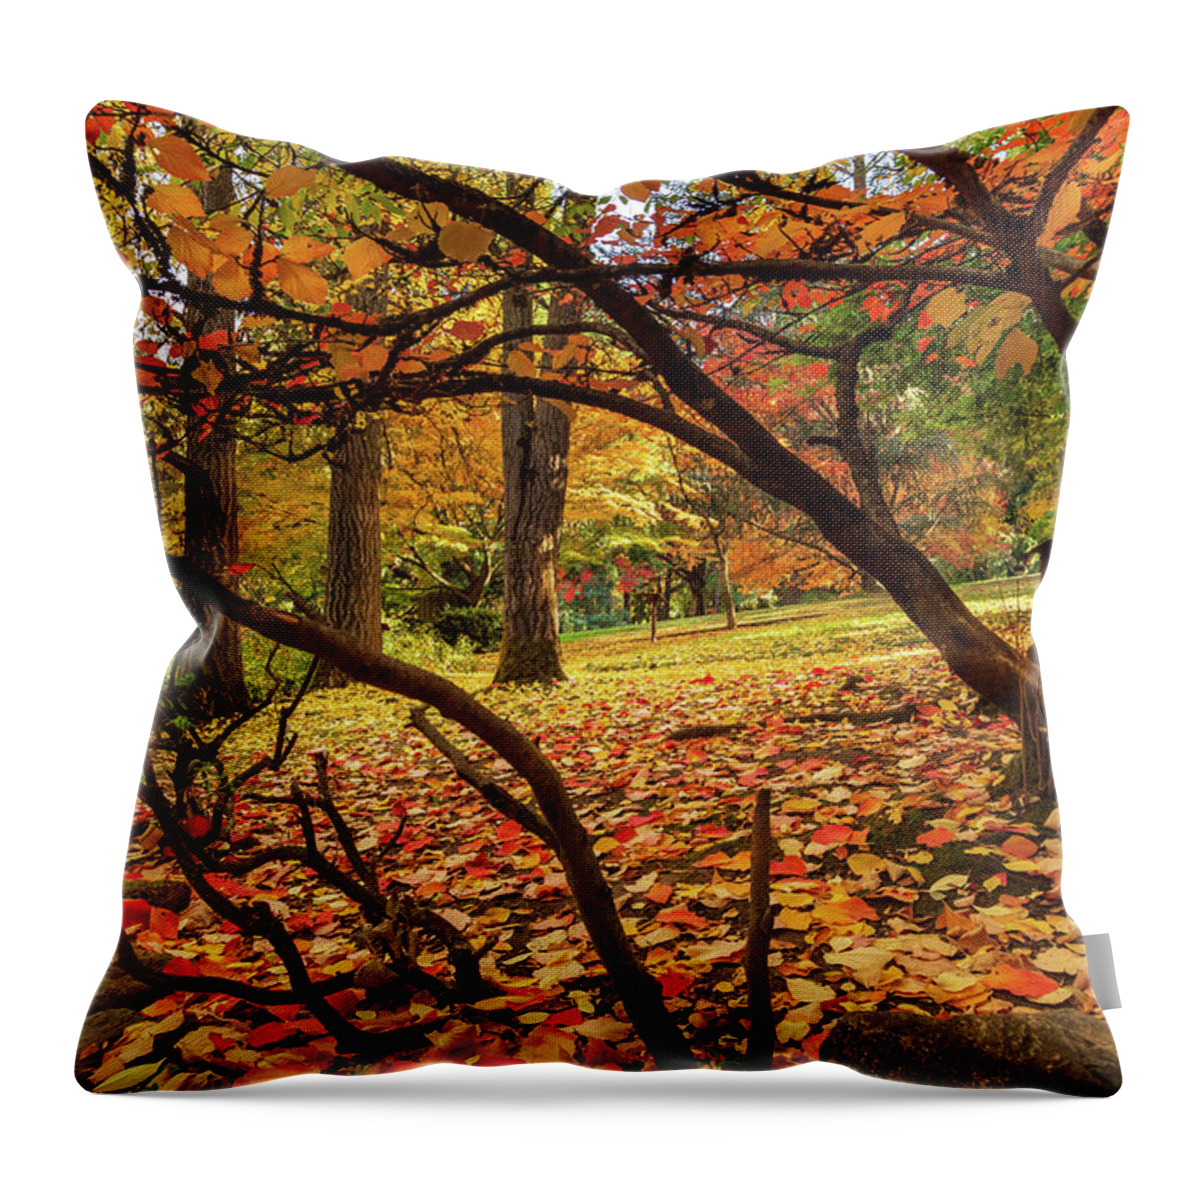 Autumn Throw Pillow featuring the photograph Autumn Leaves In Ashland by James Eddy